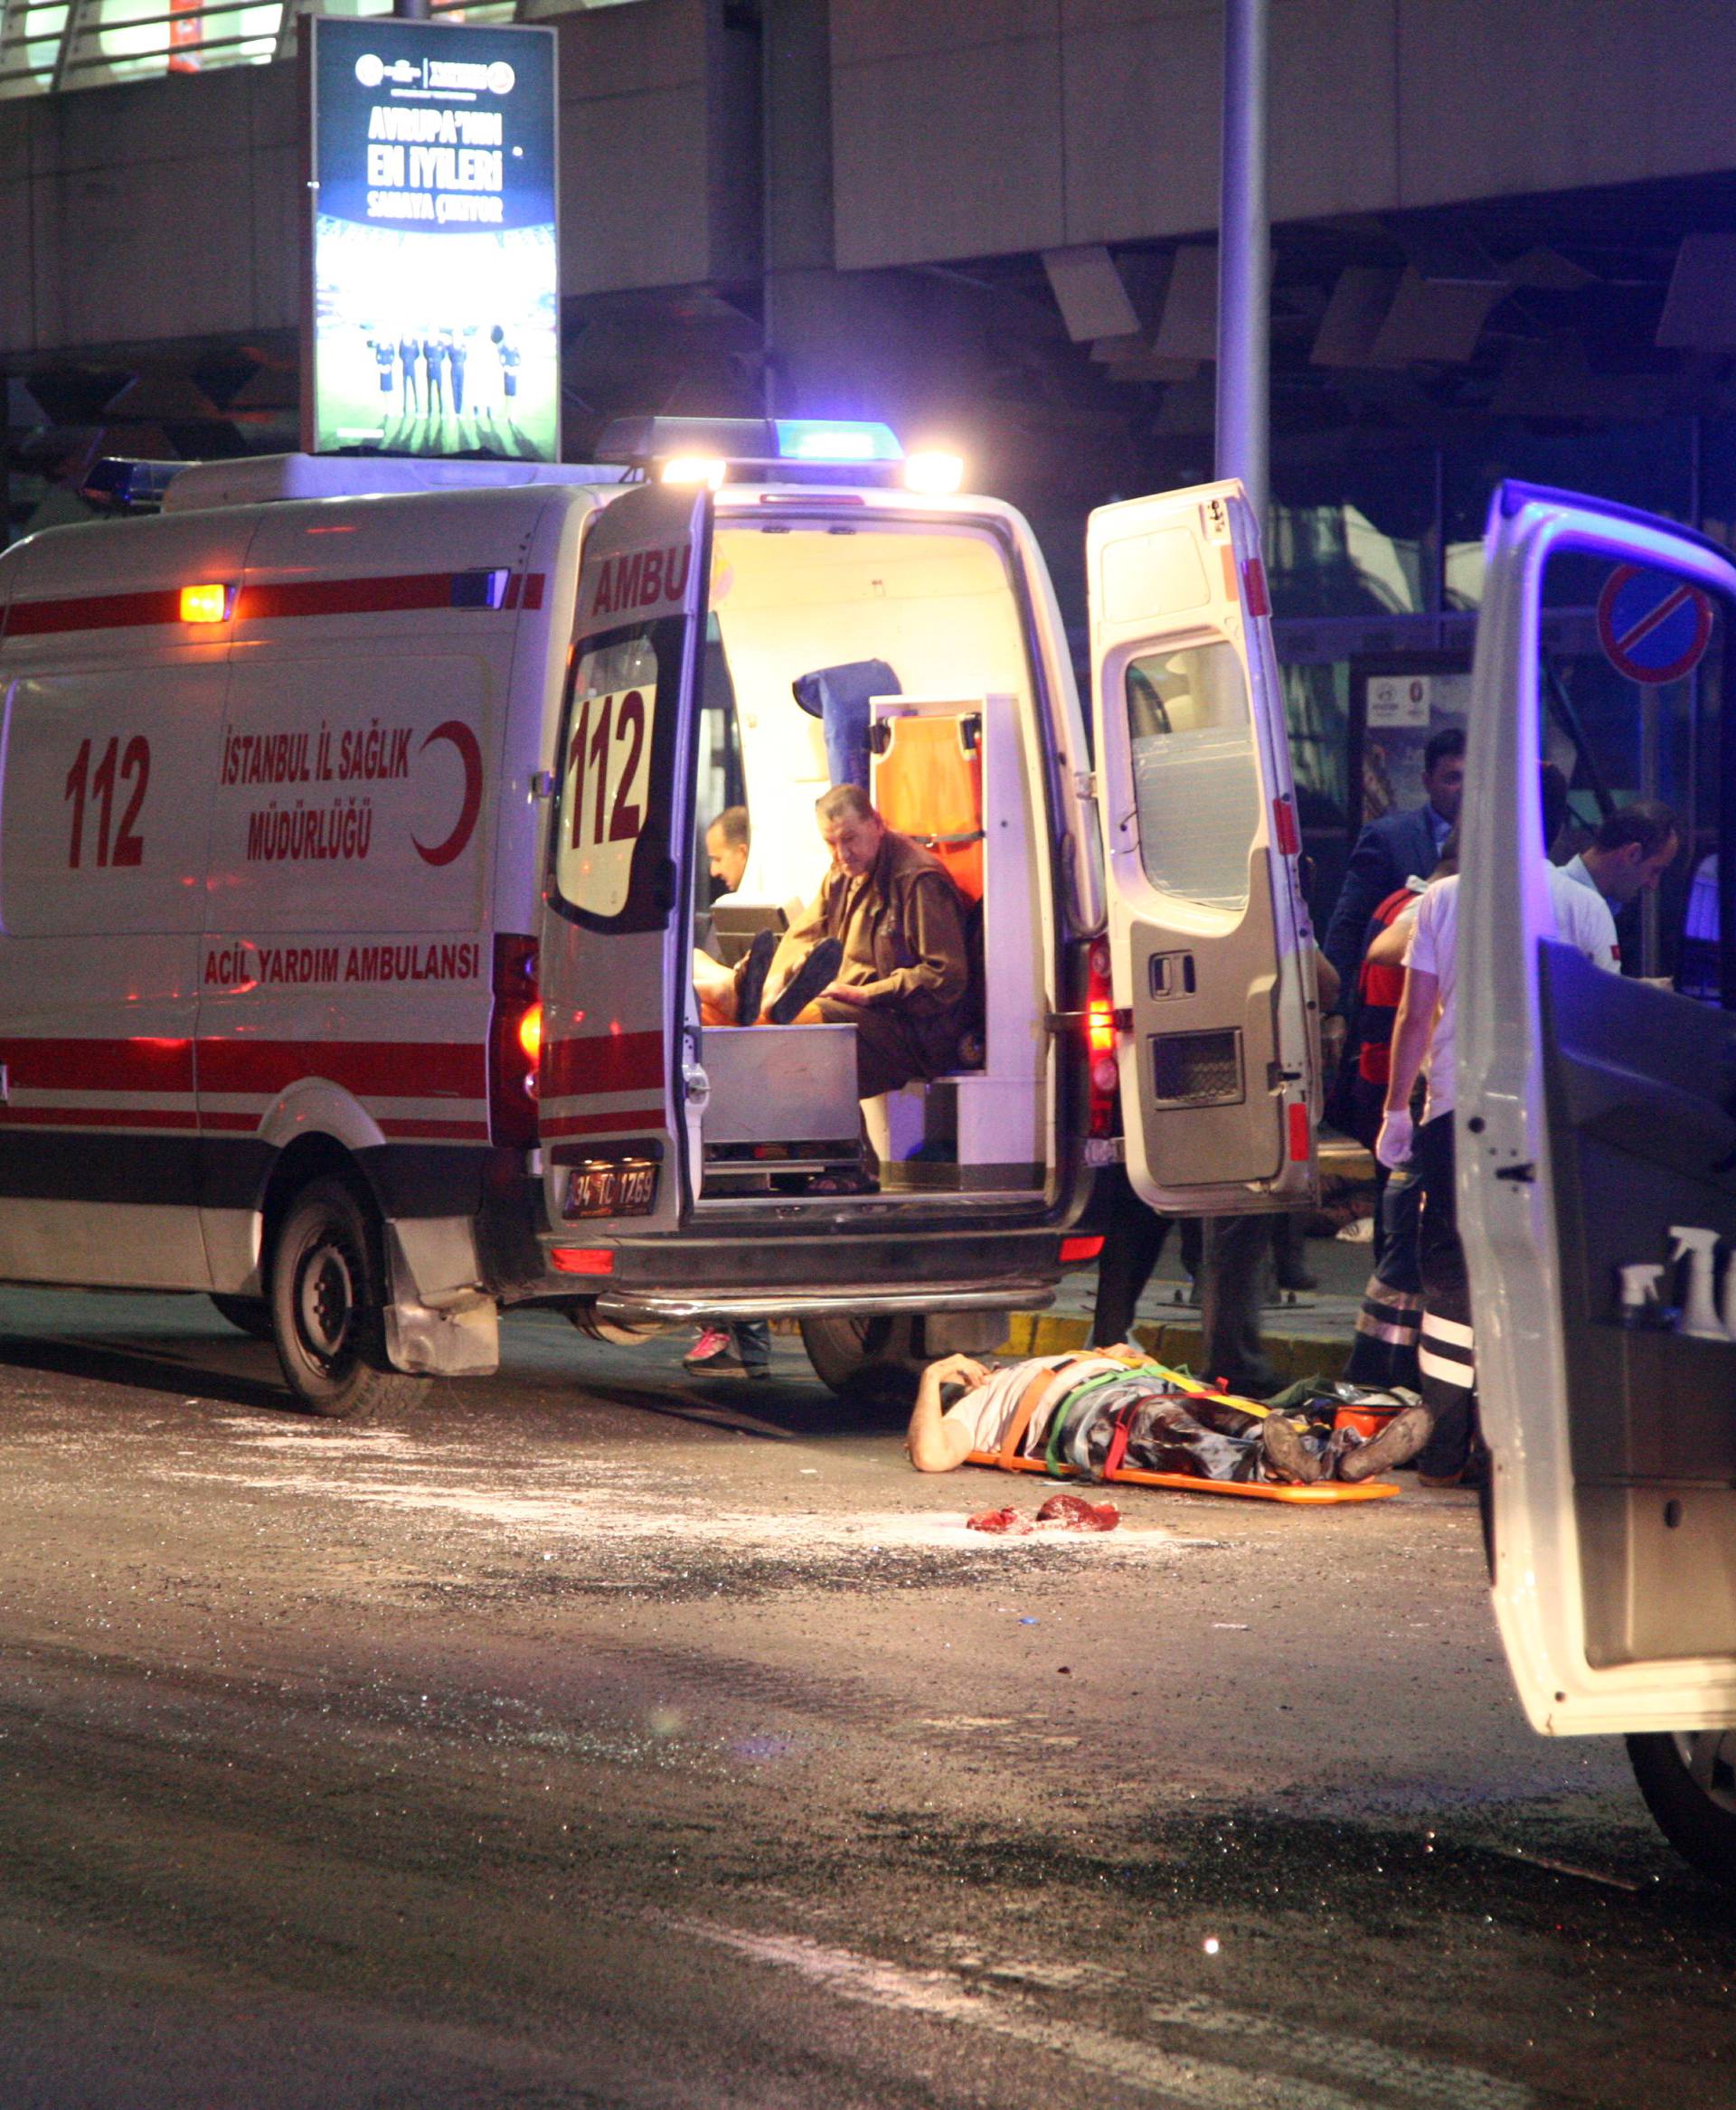 Paramedics attend to casualties outside Turkey's largest airport, Istanbul Ataturk, Turkey, following an attack